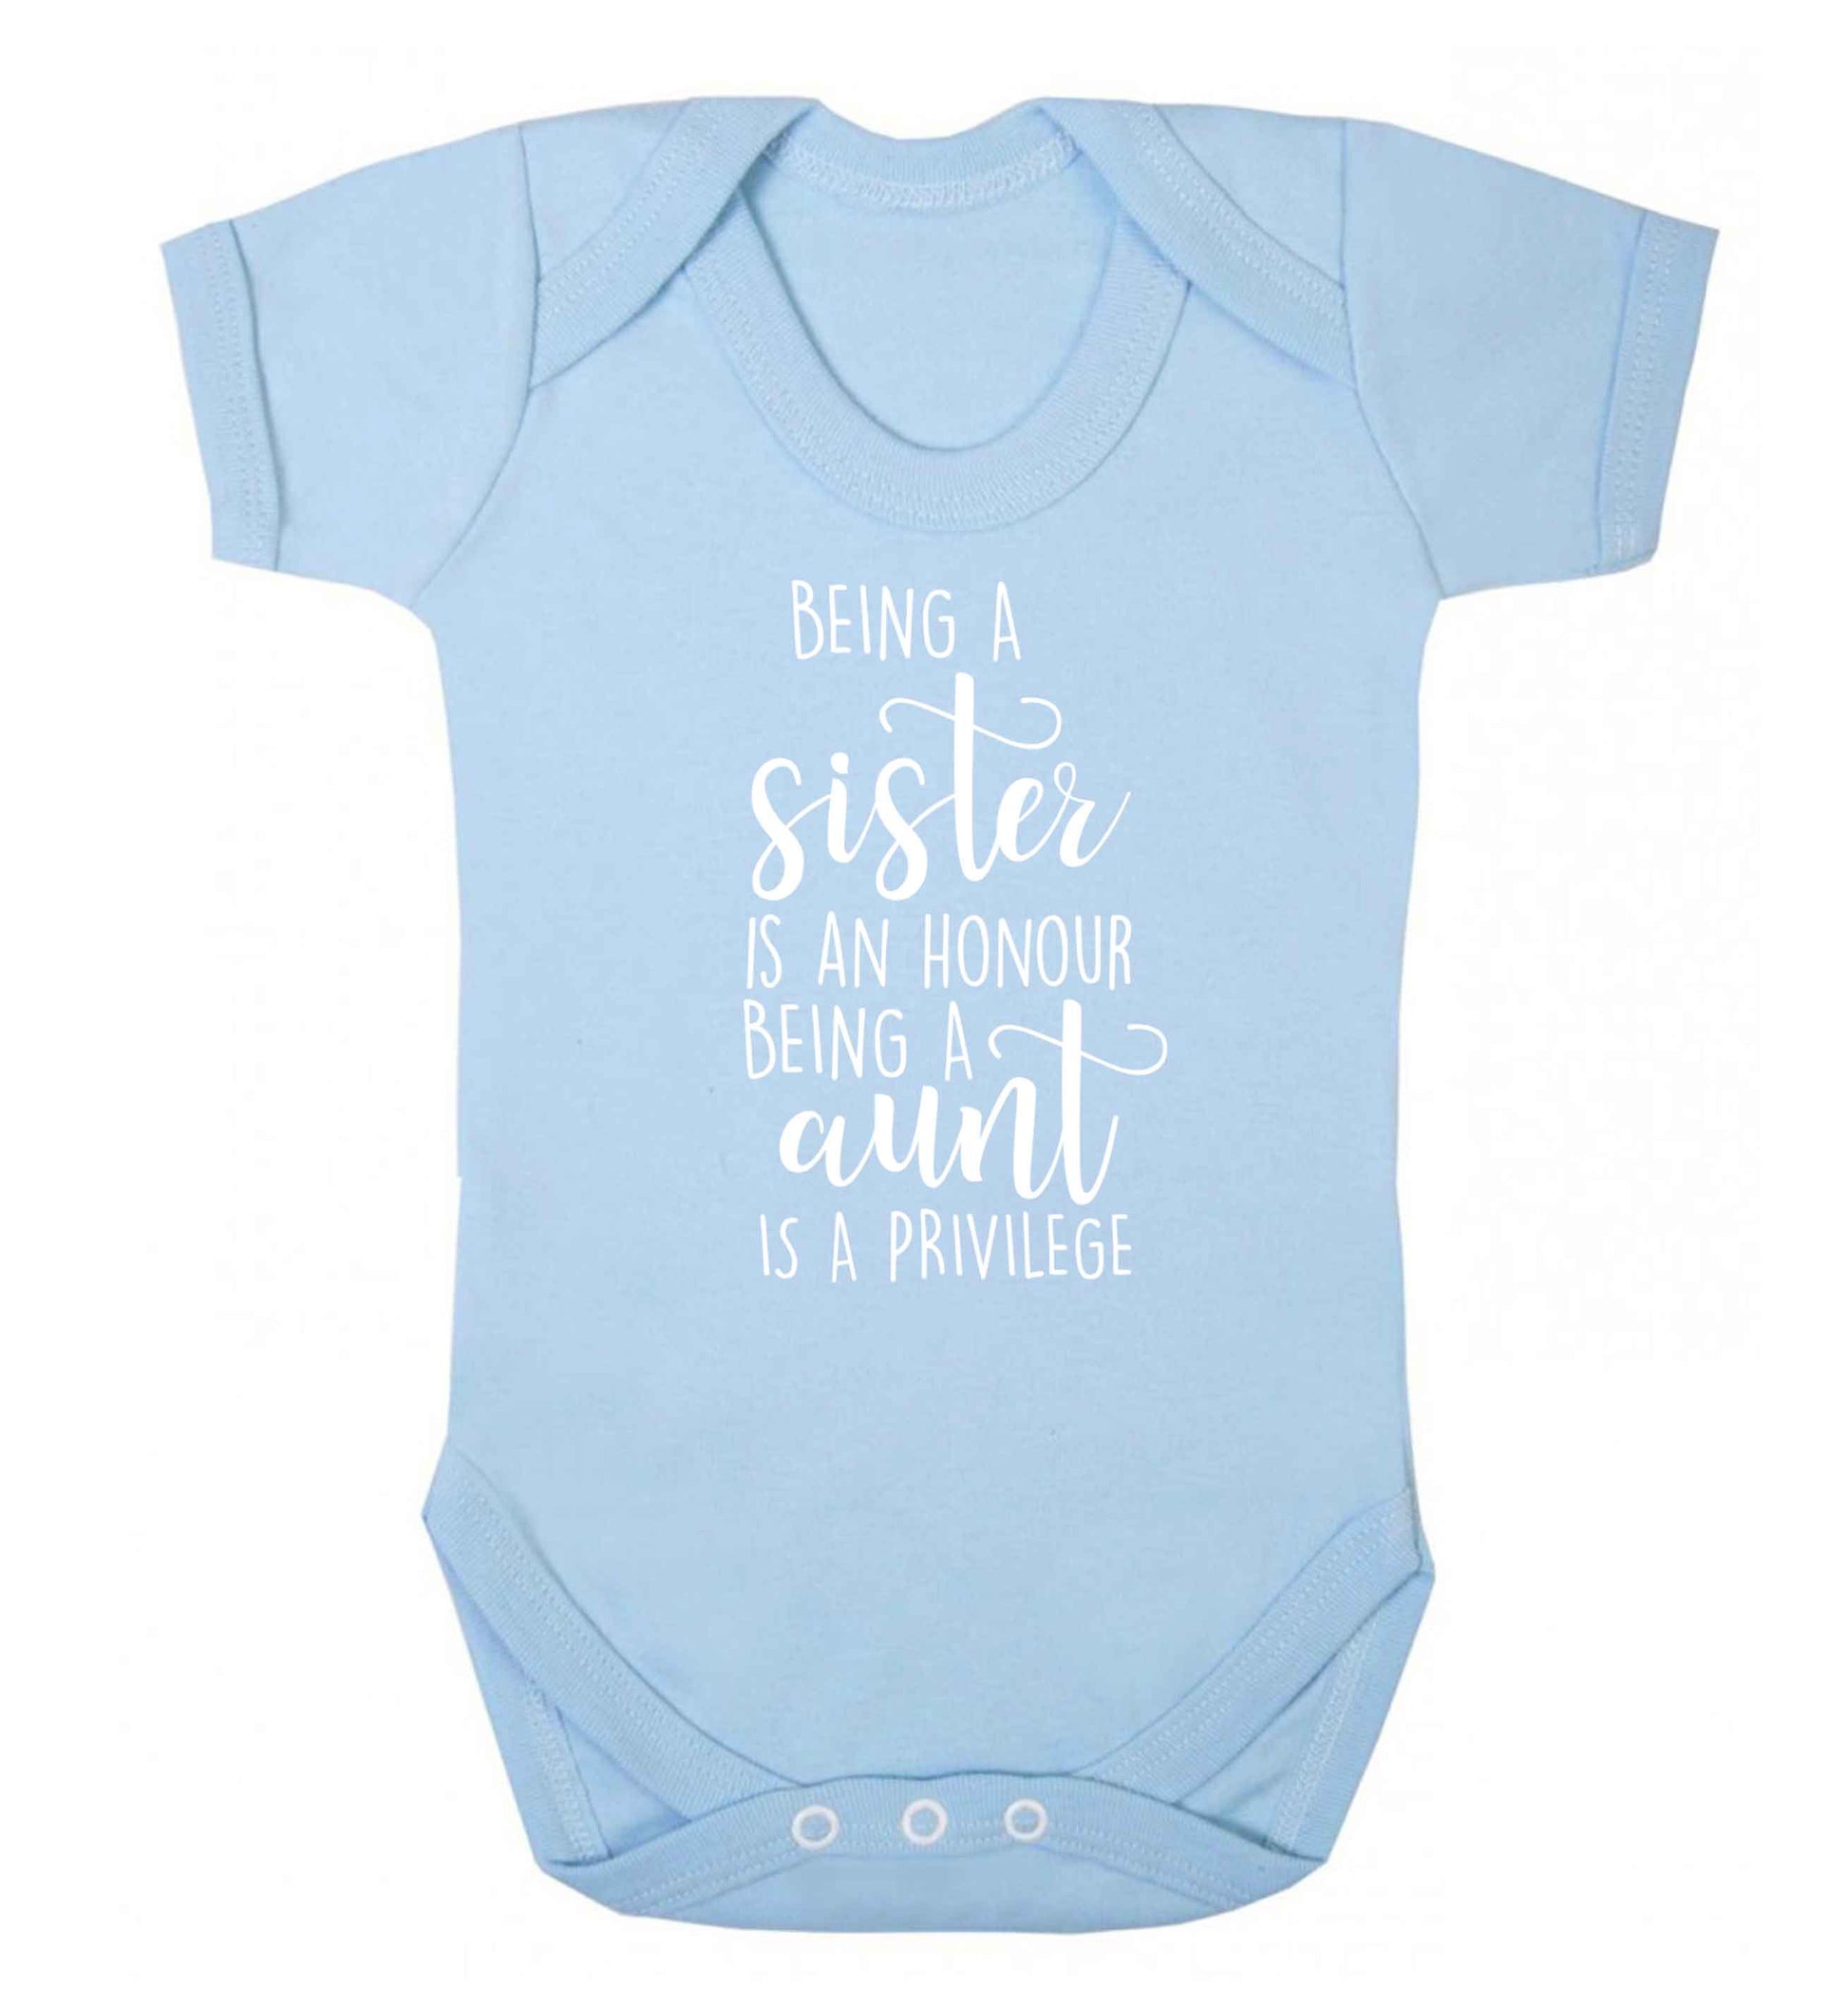 Being a sister is an honour being an auntie is a privilege Baby Vest pale blue 18-24 months